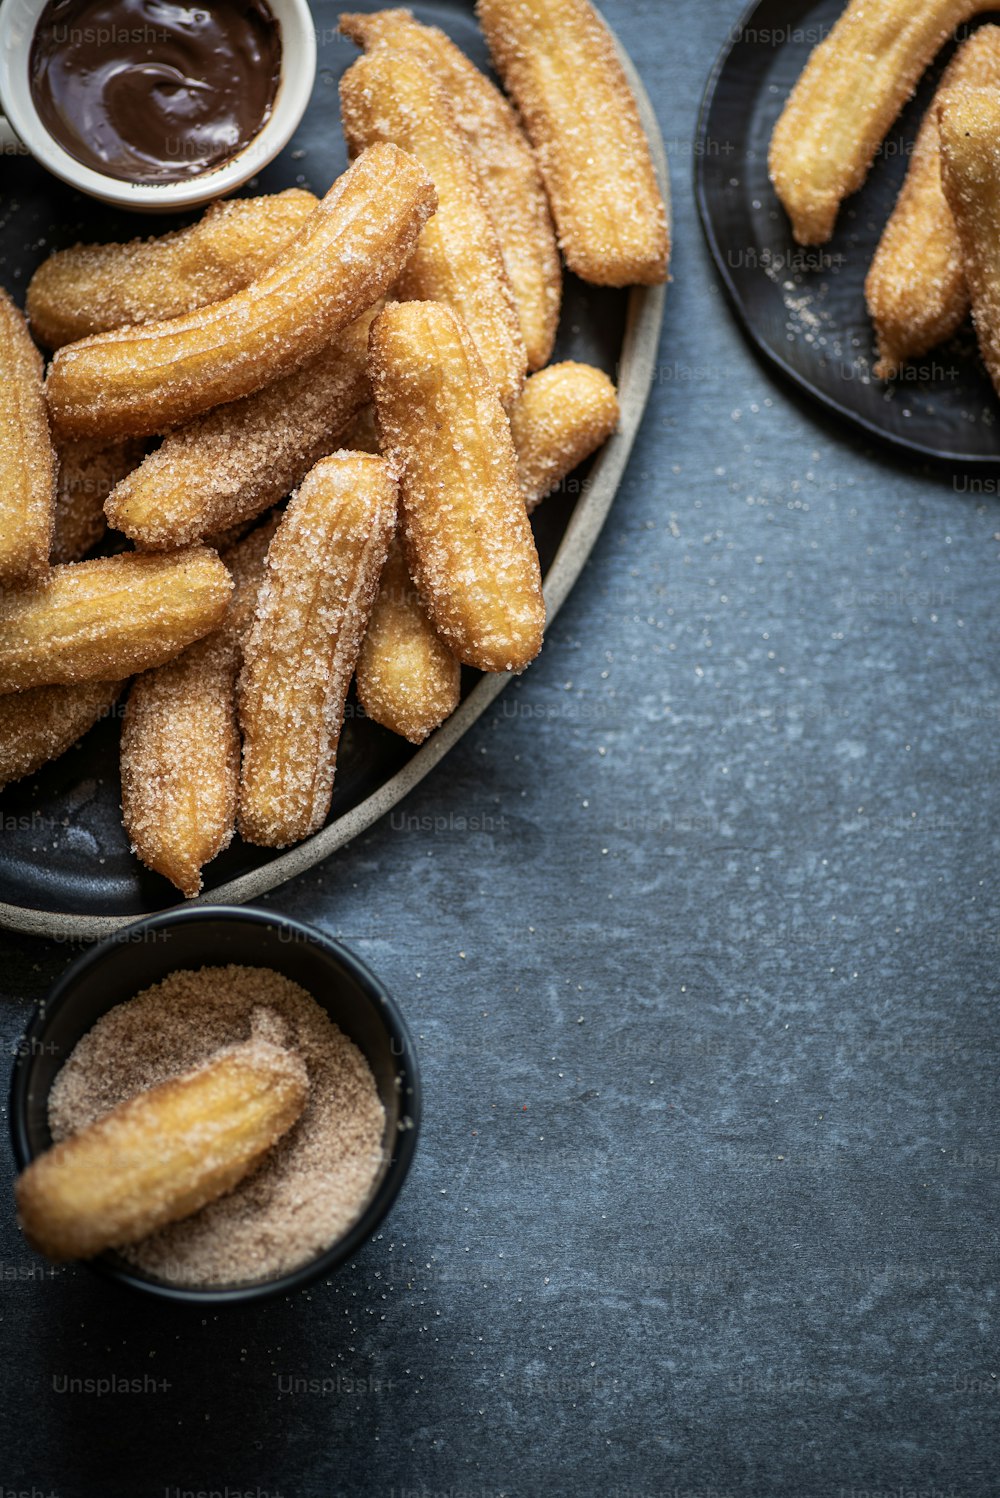 a plate of churros and dipping sauce on a table